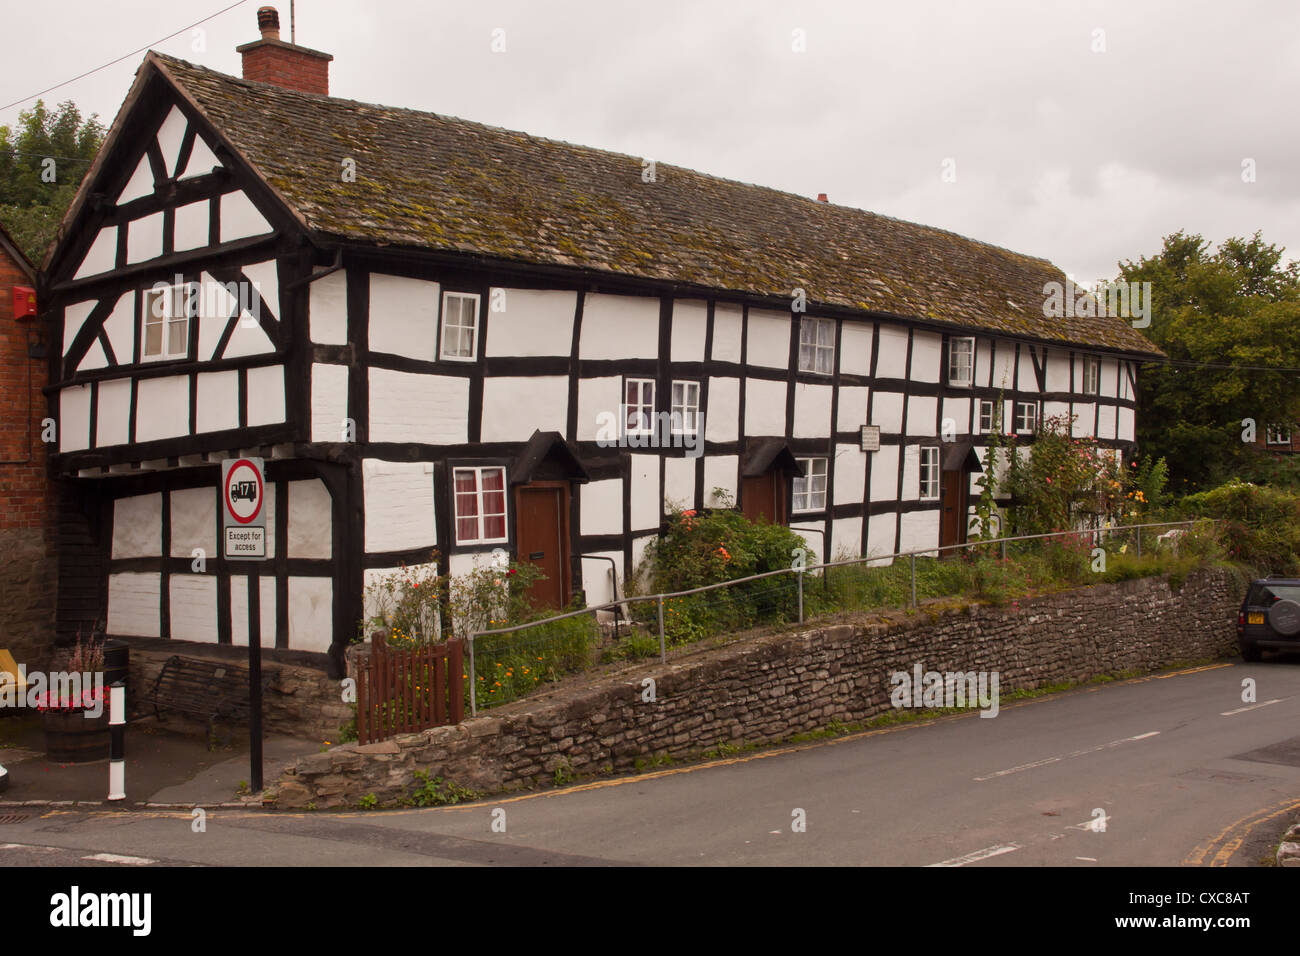 3-4 'Duppa Alms Houses' built 1486 - 1502 in the medieval historic village hamlet of Pembridge Herefordshire England UK. Stock Photo